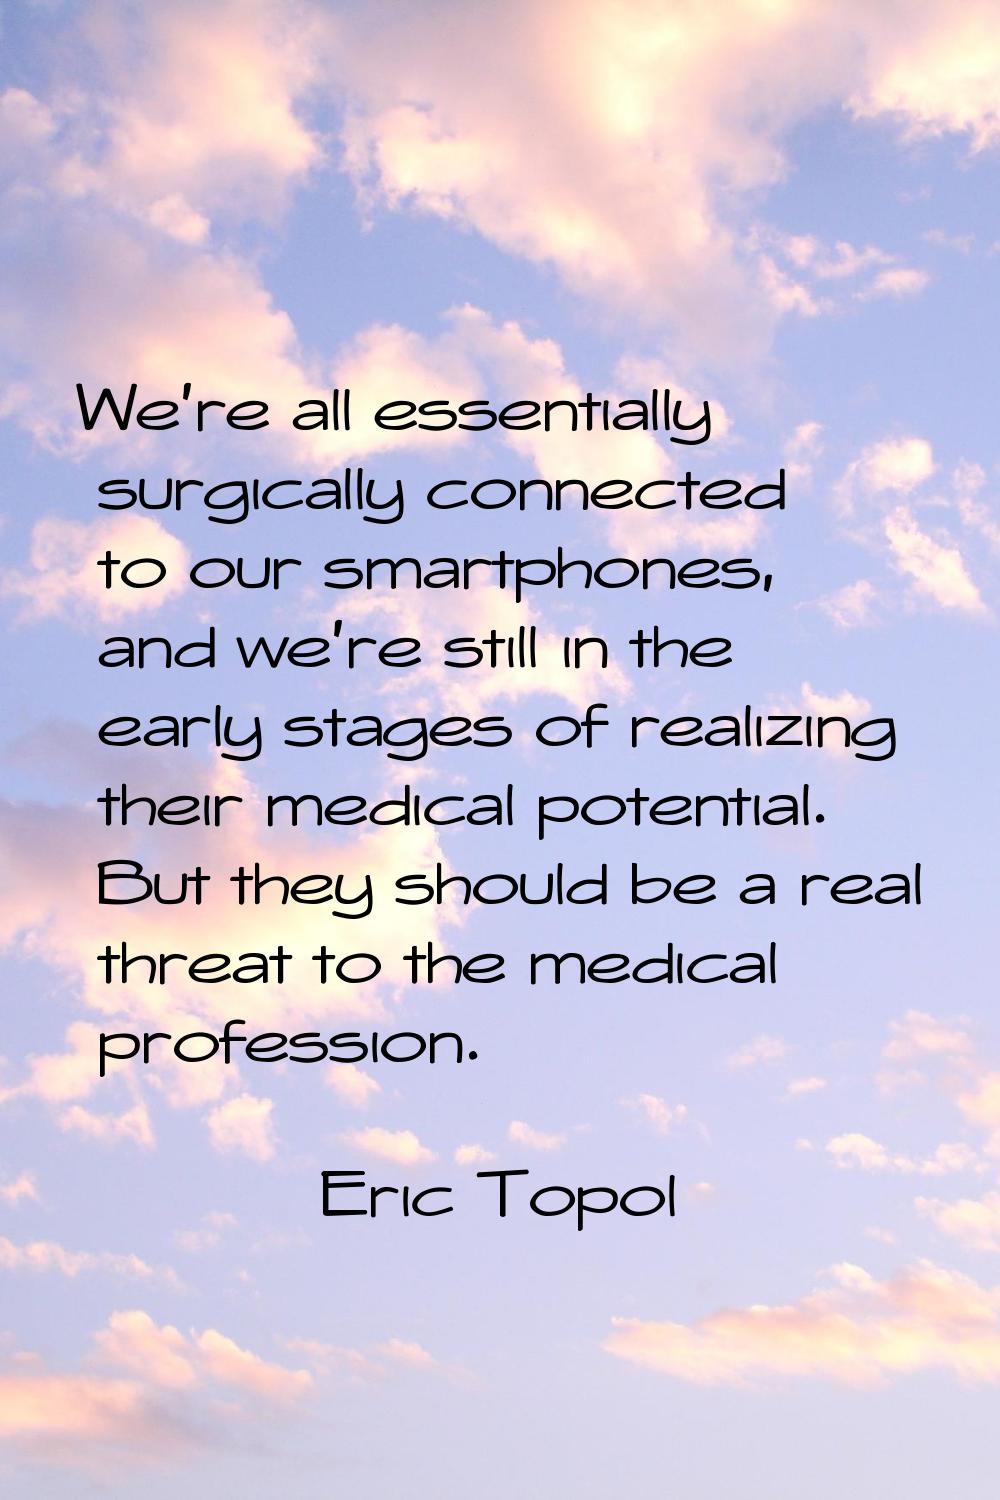 We're all essentially surgically connected to our smartphones, and we're still in the early stages 